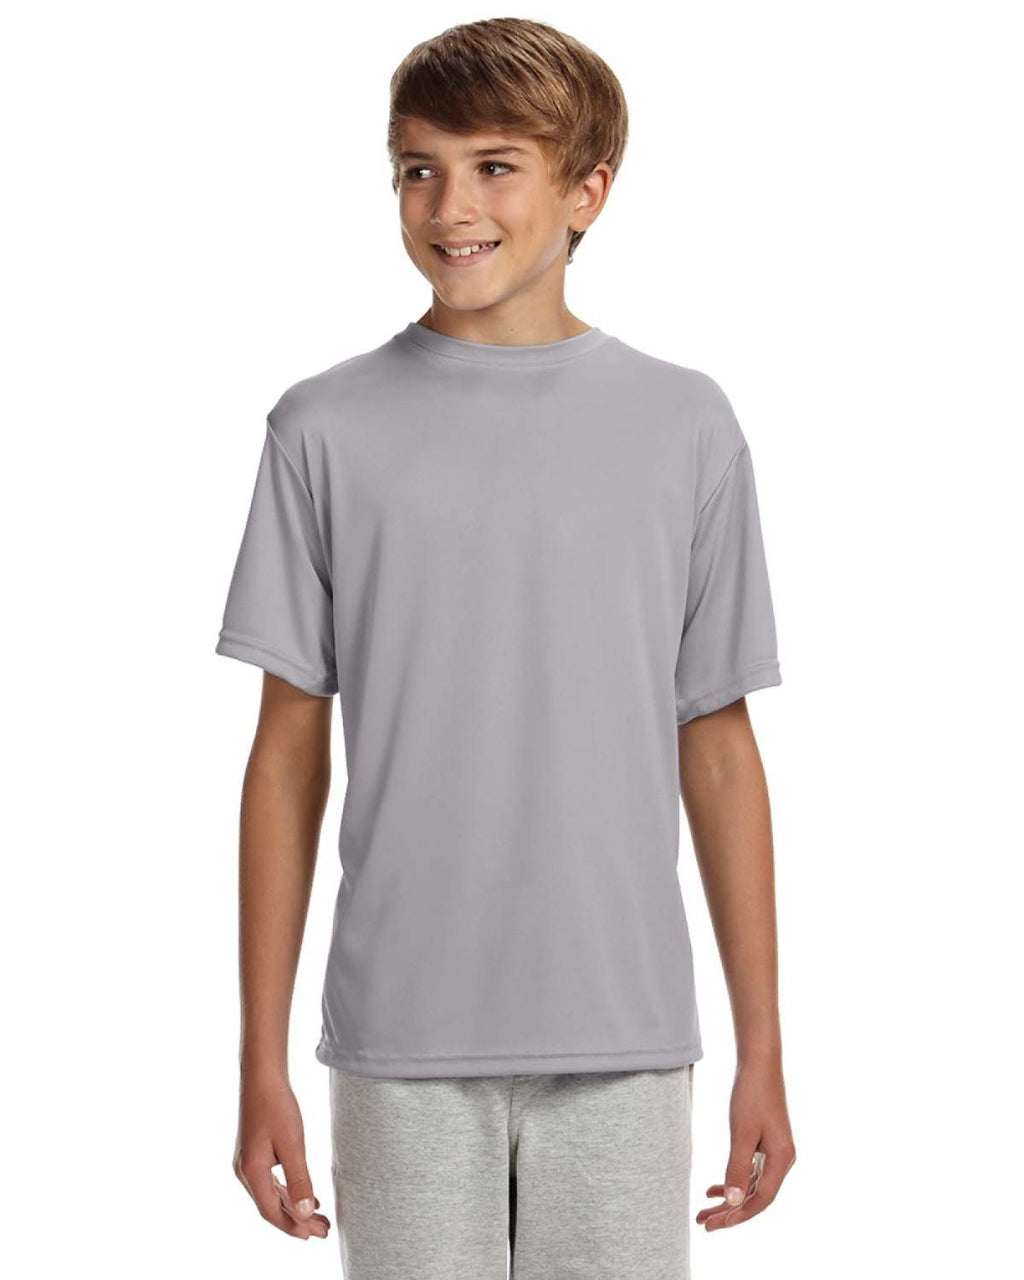 NB3142-A4 Youth Cooling Performance T-Shirt